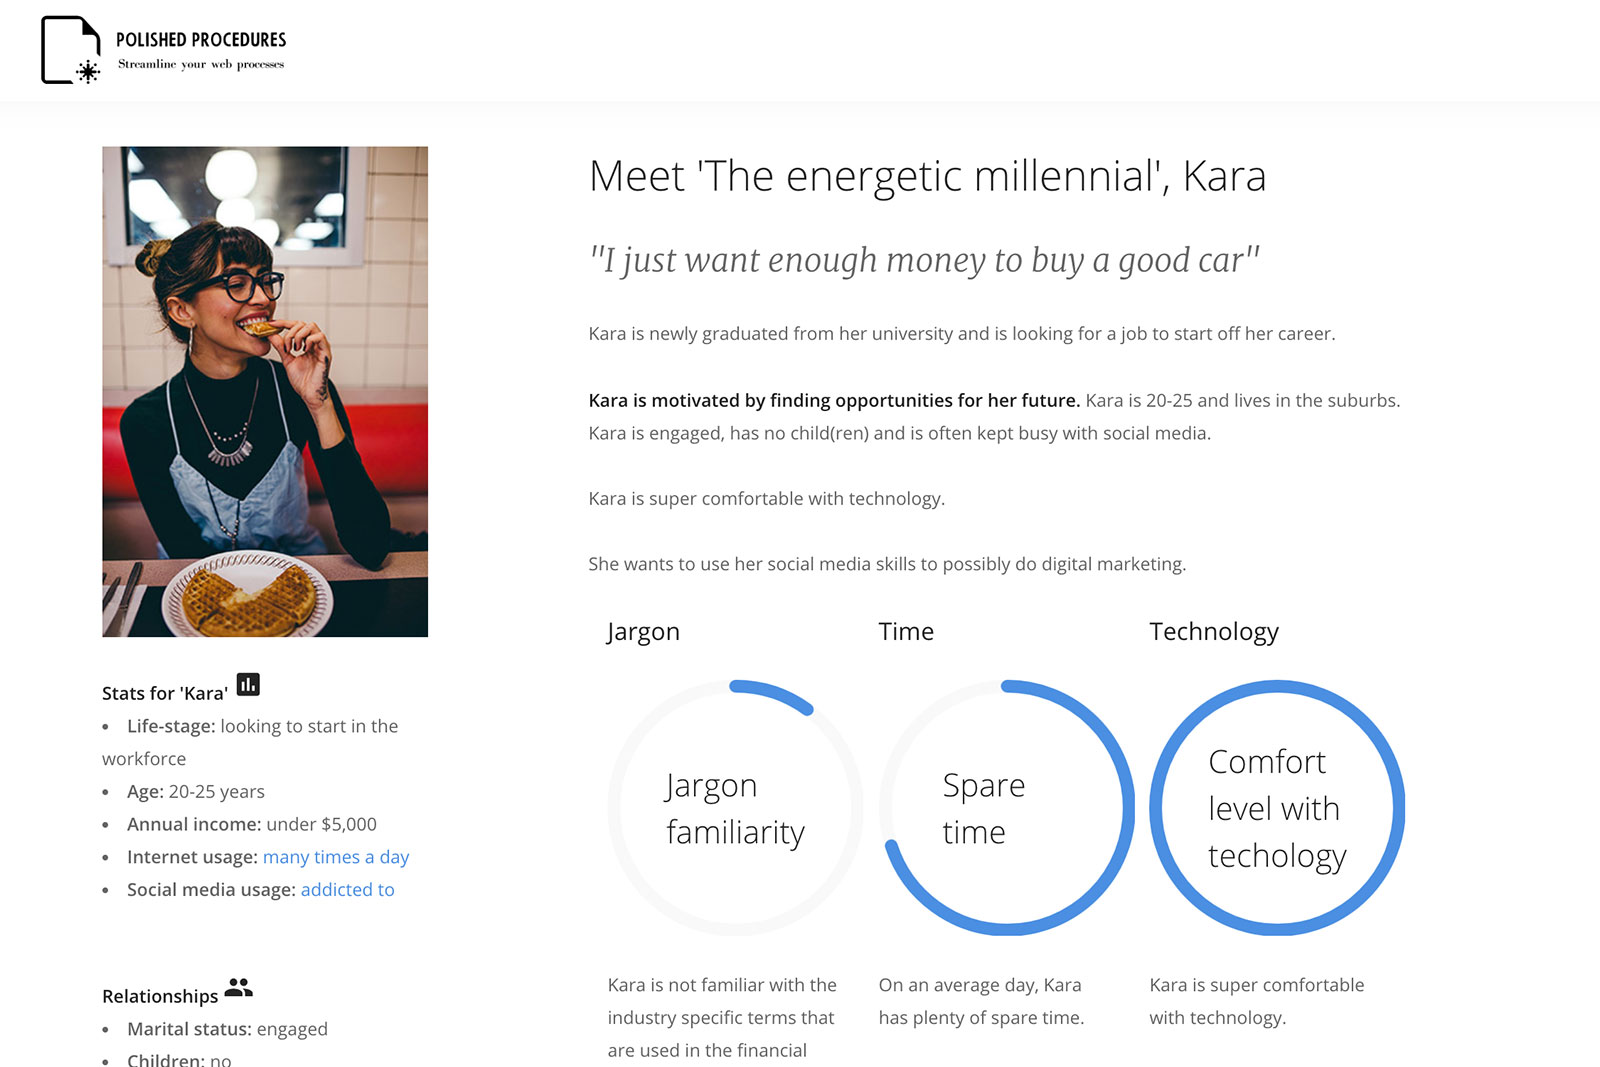 'The energetic millennial' persona